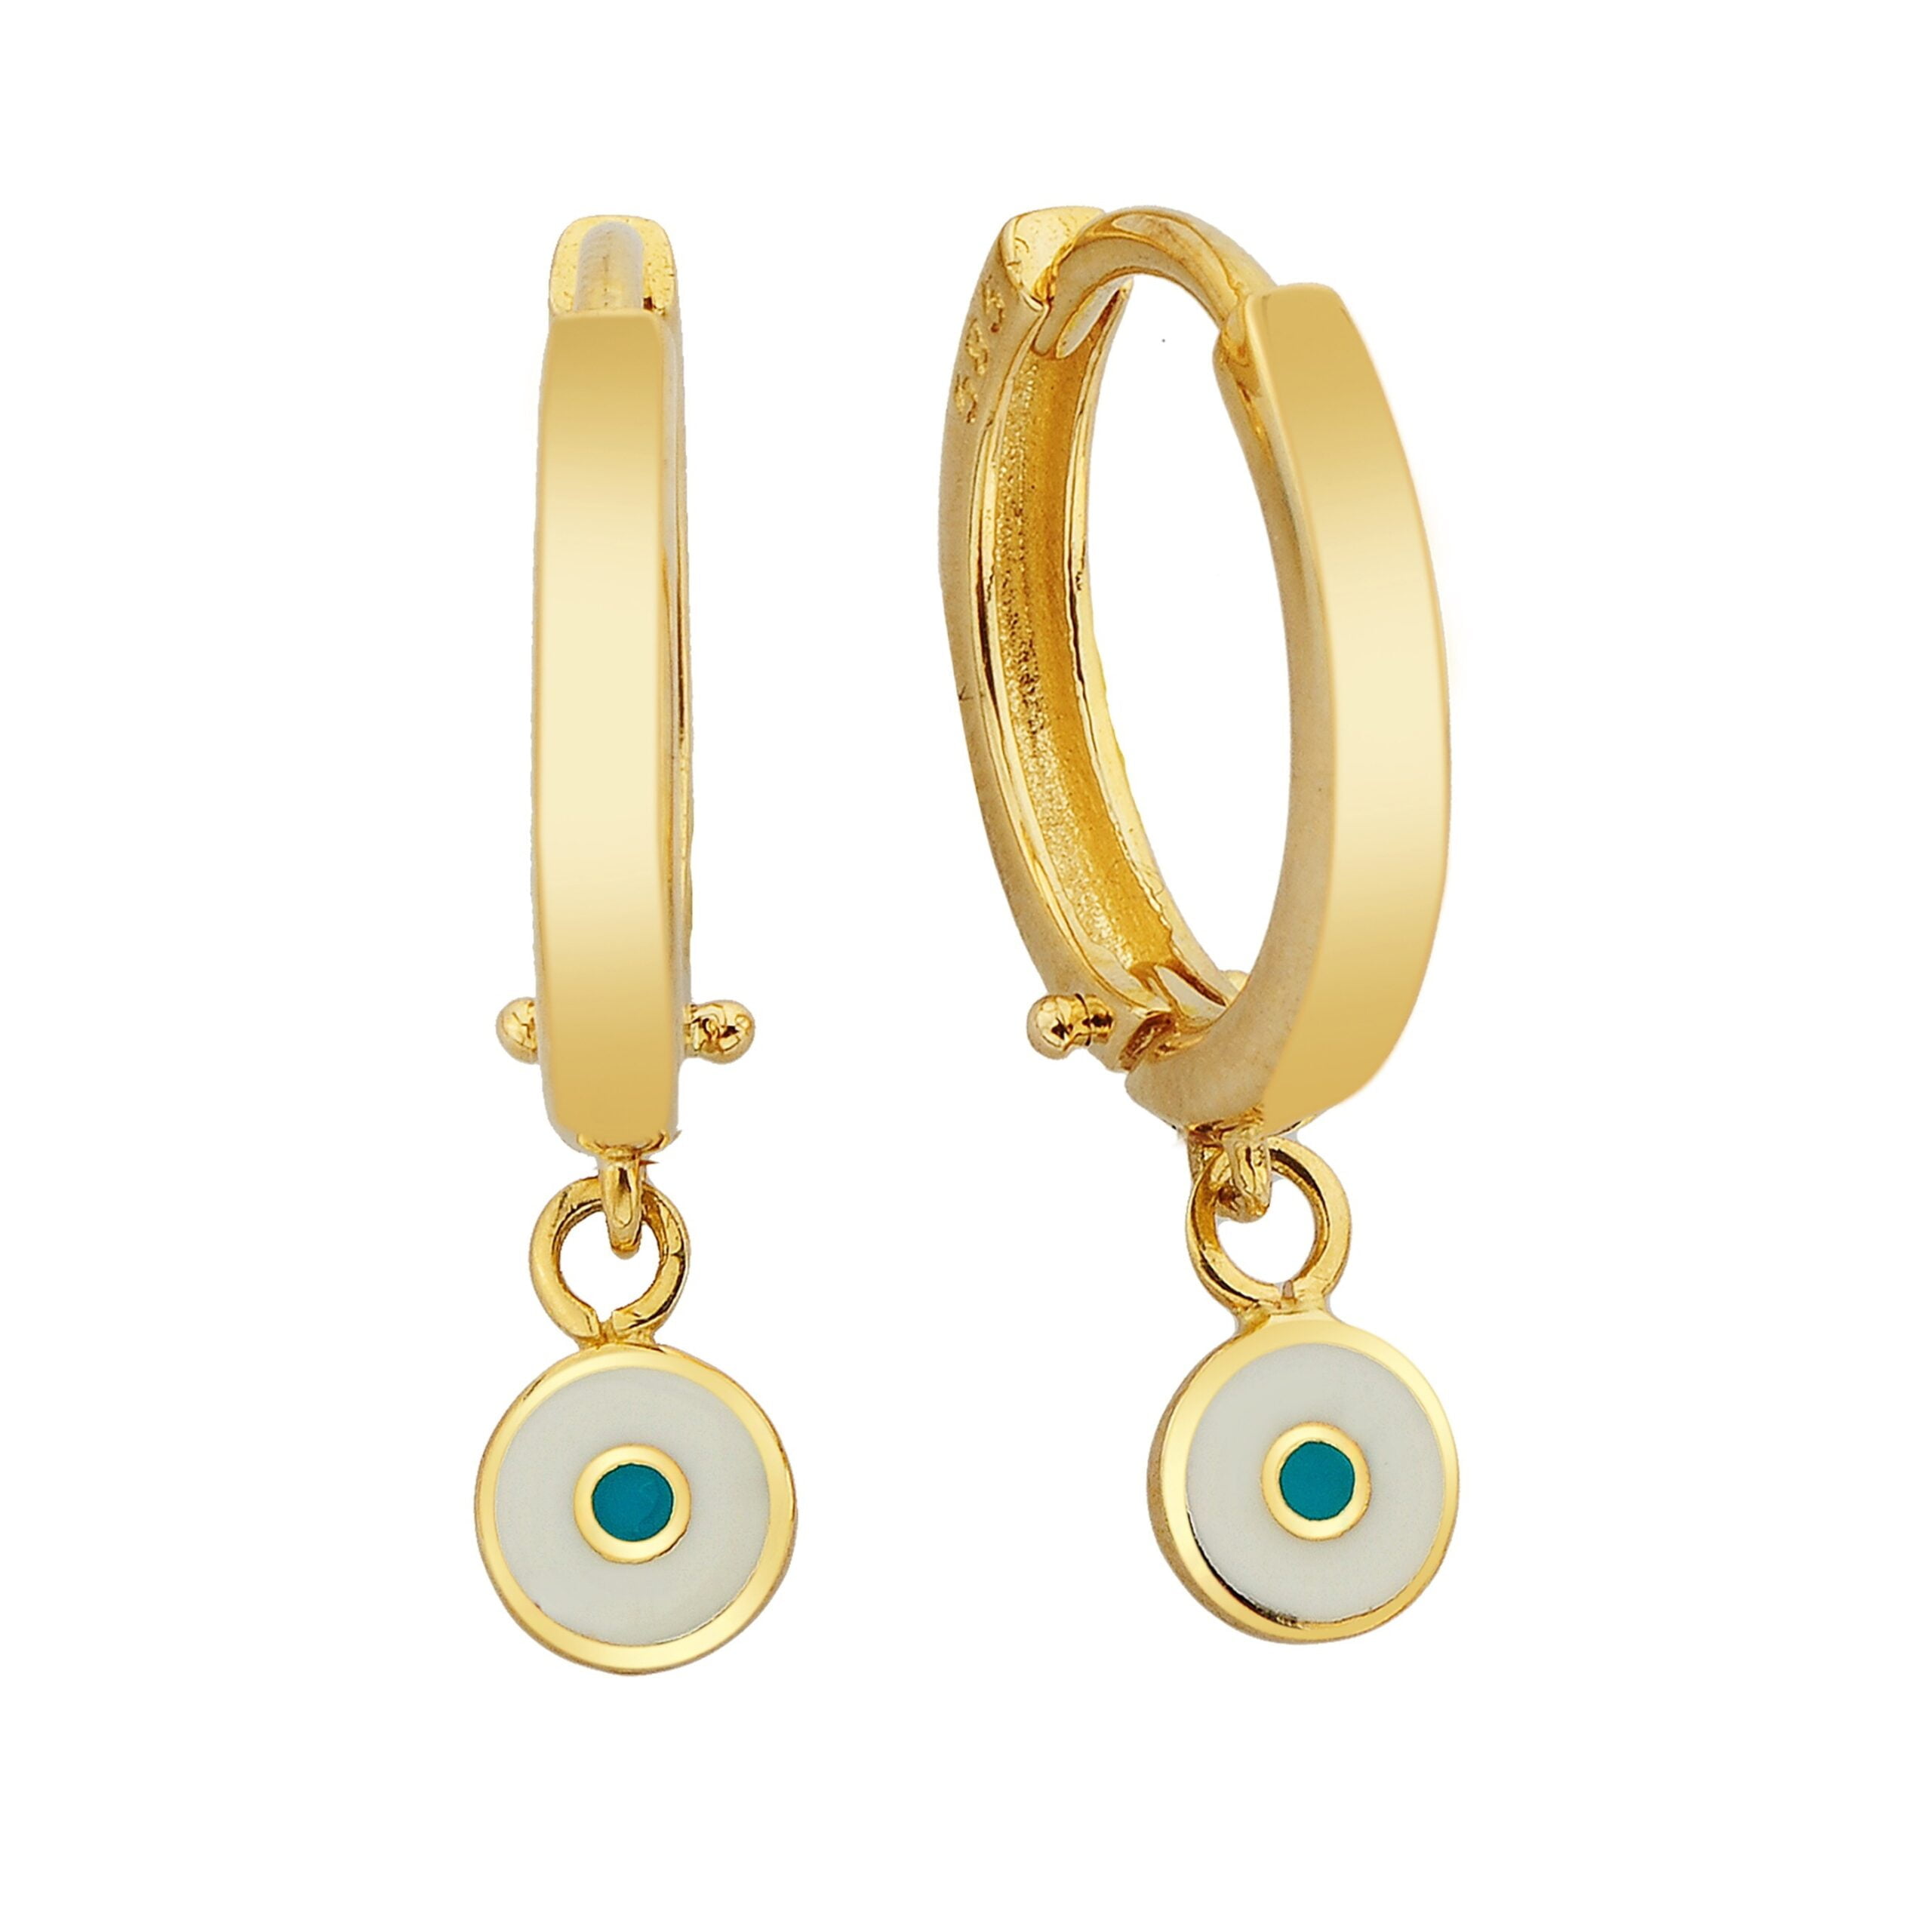 14K Real Solid Gold Evil Eye Drop Dangle Earrings for Women Decorated with White and Blue Enamel handmade luck good luck jewelry birthday gift.